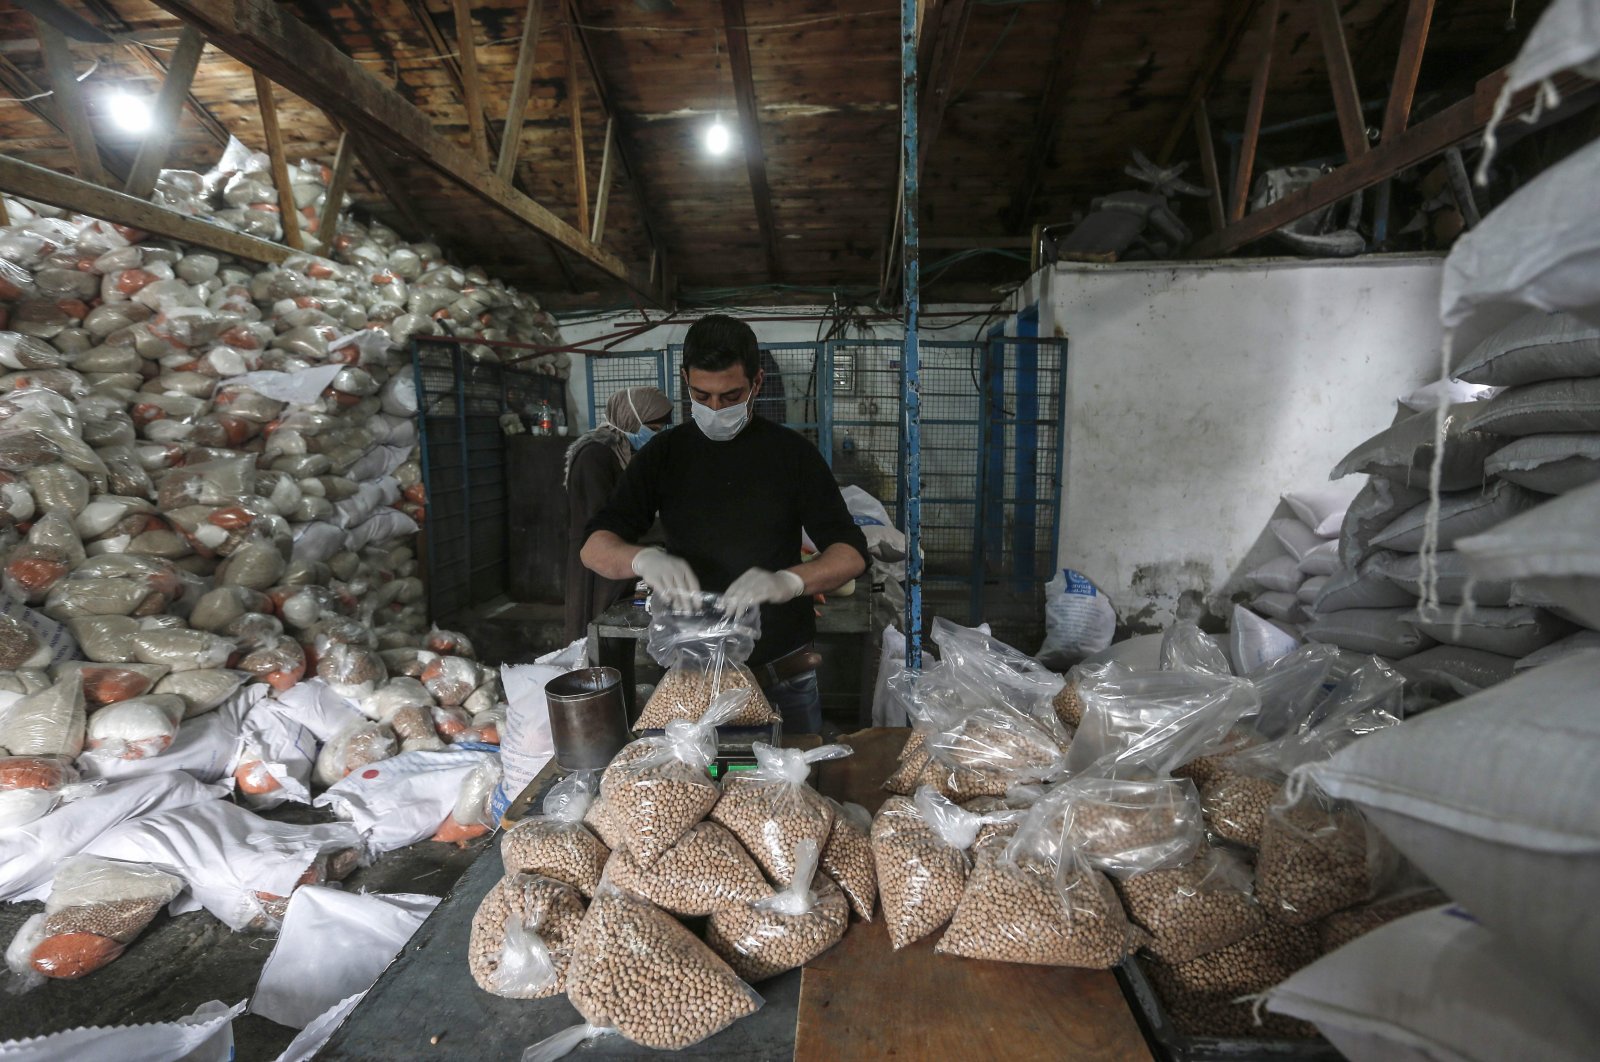 Palestinian employees at the United Nations Relief and Works Agency for Palestinian Refugees (UNRWA) wearing protective masks and gloves prepare food aid rations to be delivered to refugee family homes rather than distributed at a U.N. center, in Gaza City, Tuesday, March 31, 2020. (AFP Photo)